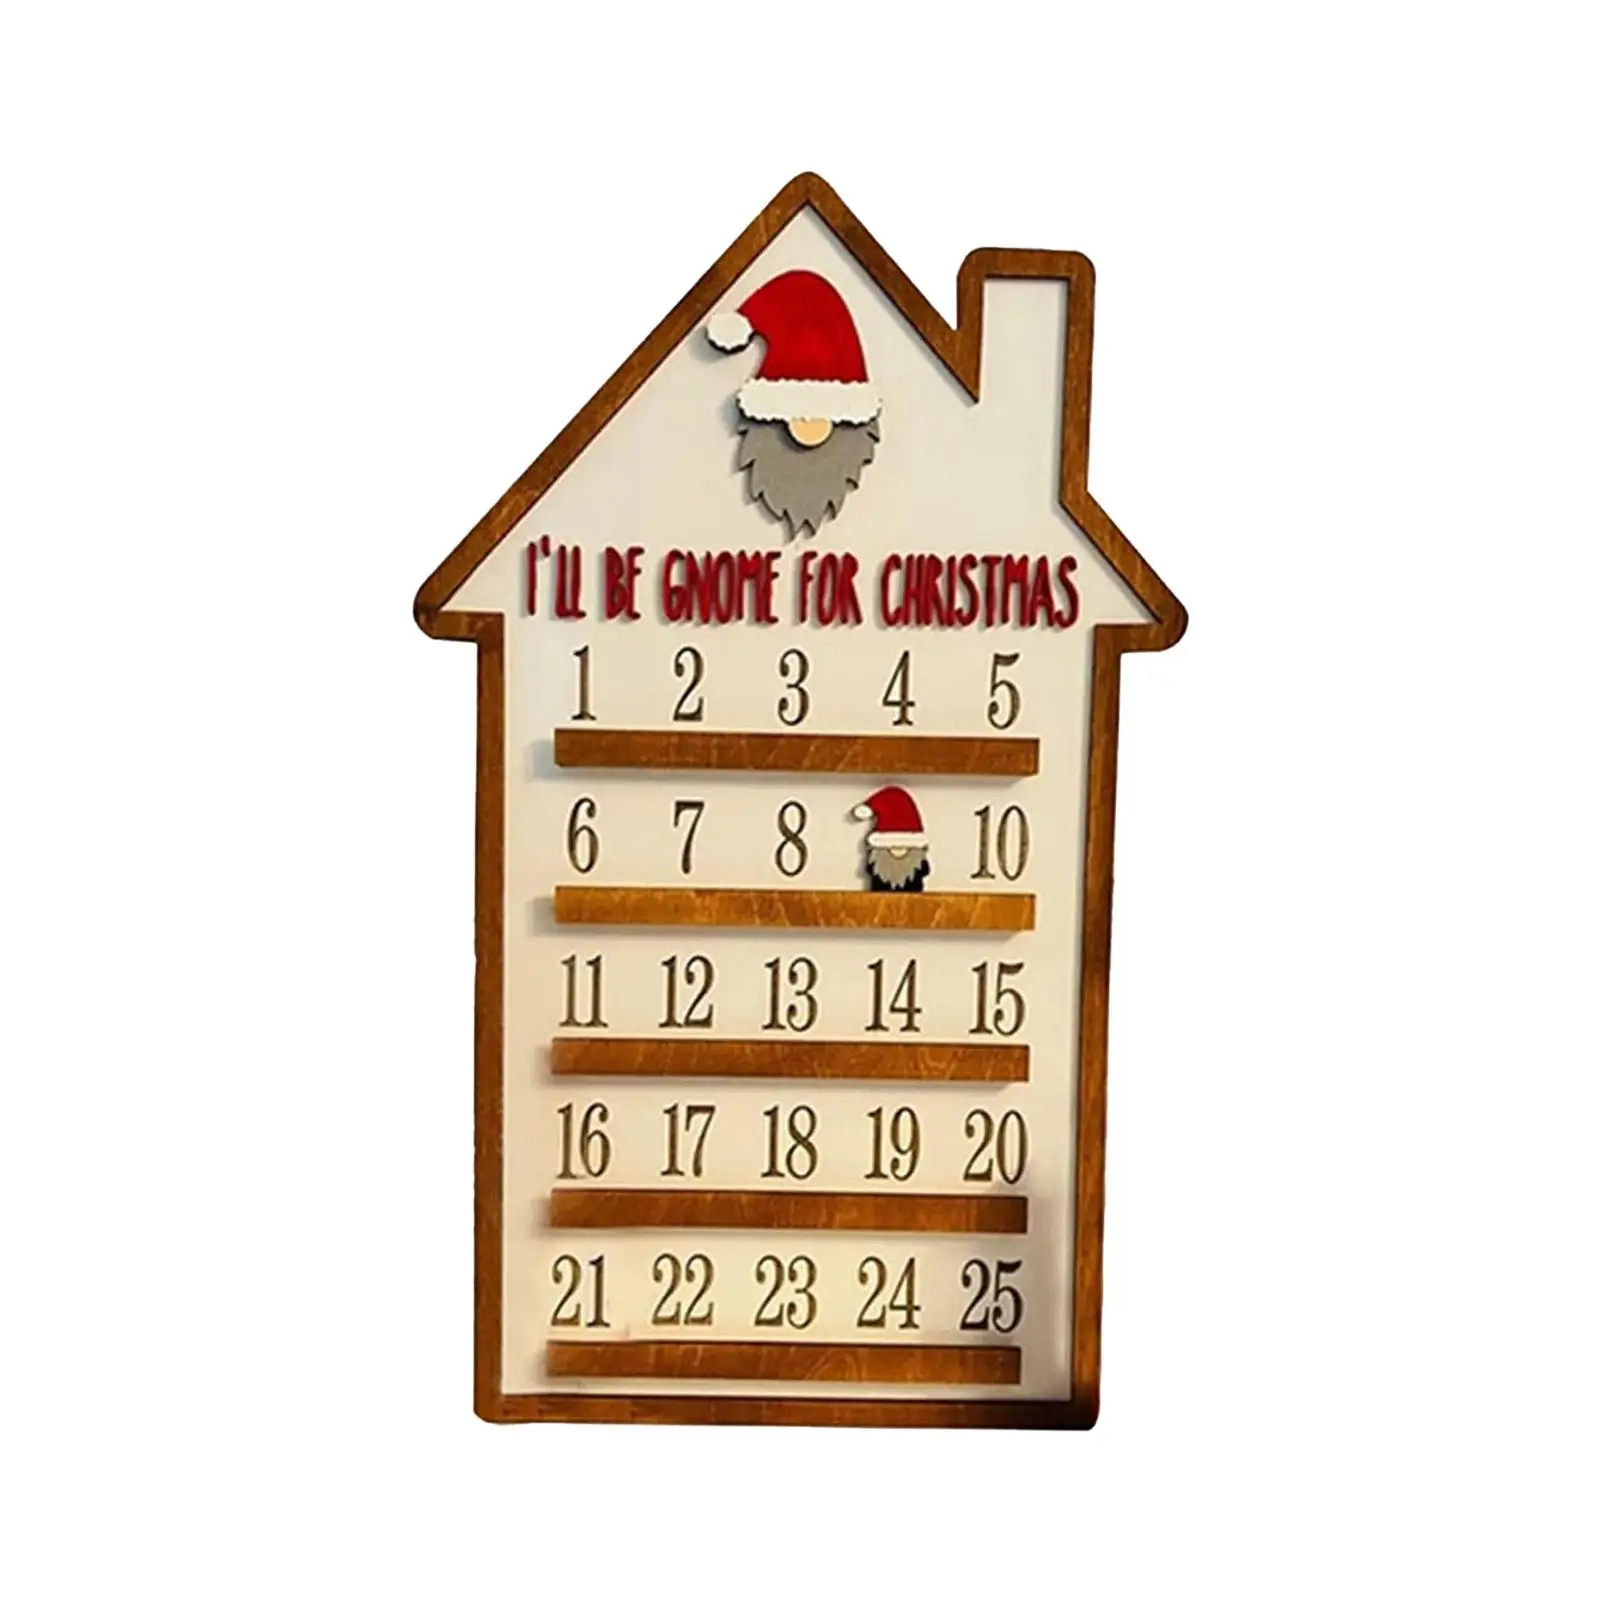 Christmas Advent Calendars Desktop Table Decor Wooden Crafts Holiday Decor for Holiday Party Office Bedroom Holdiday Gifts